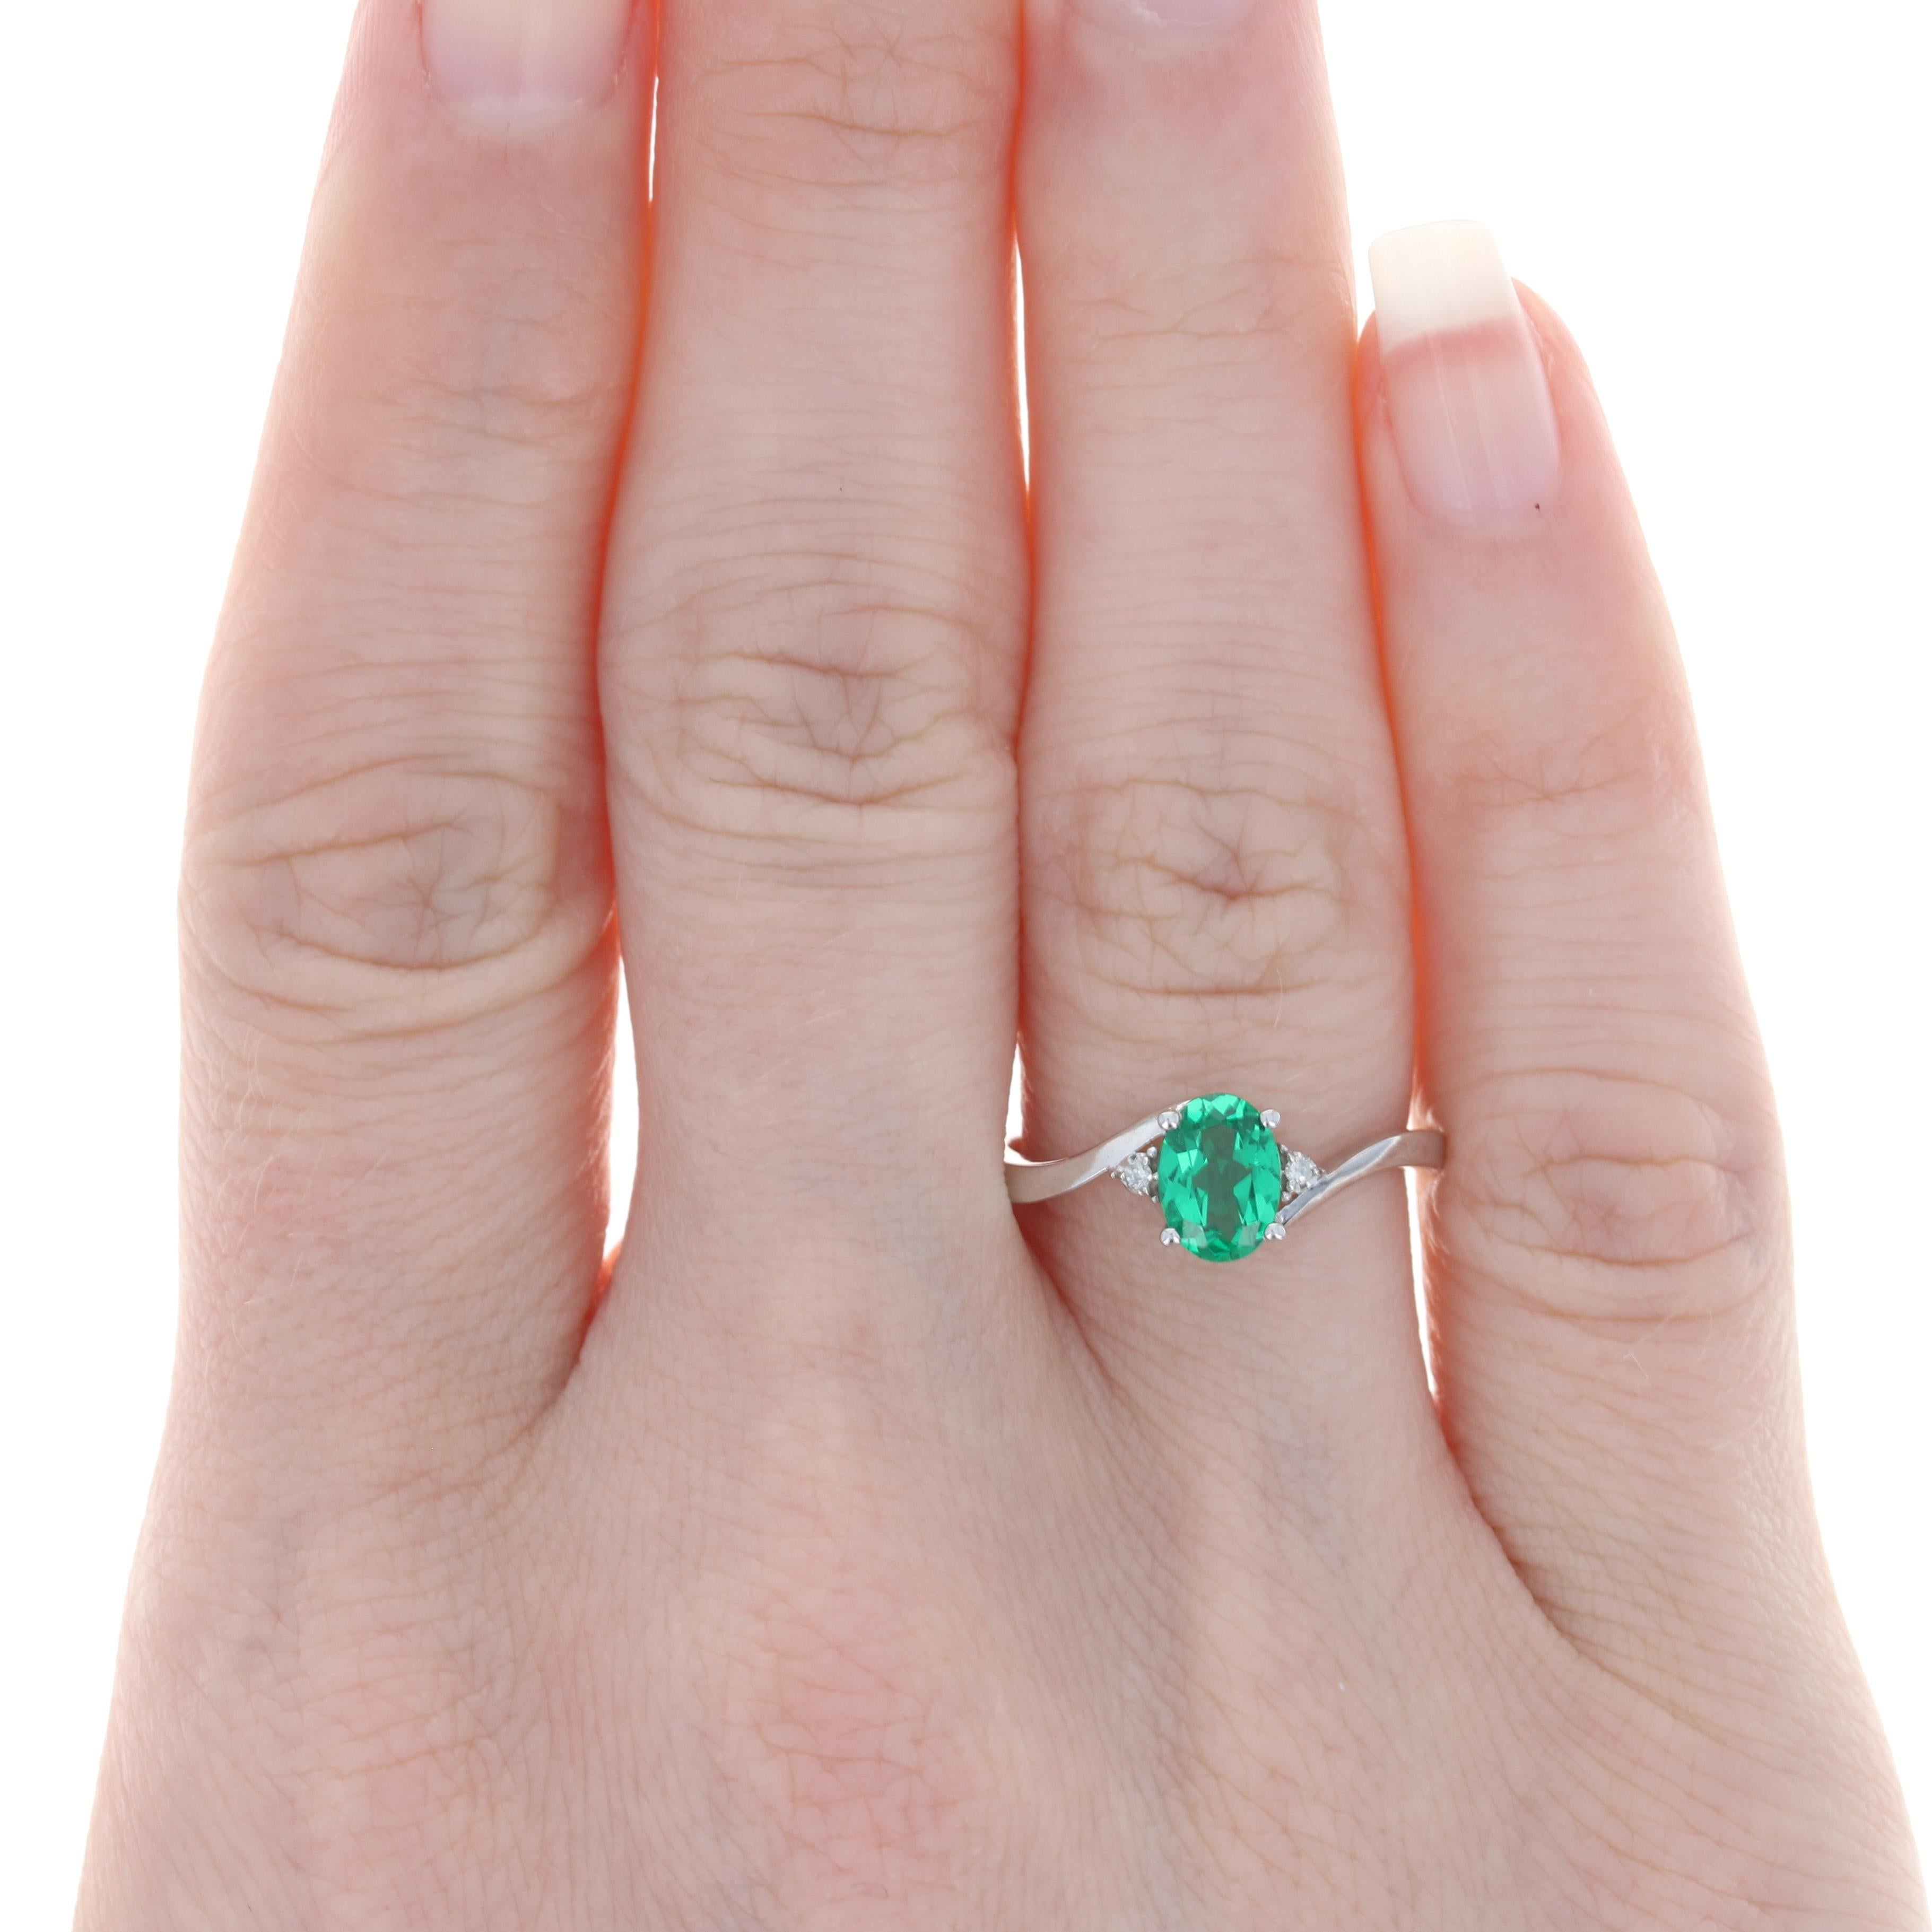 For Sale:  New Synthetic Emerald & Diamond Ring, 10k White Gold Bypass .86ctw 3